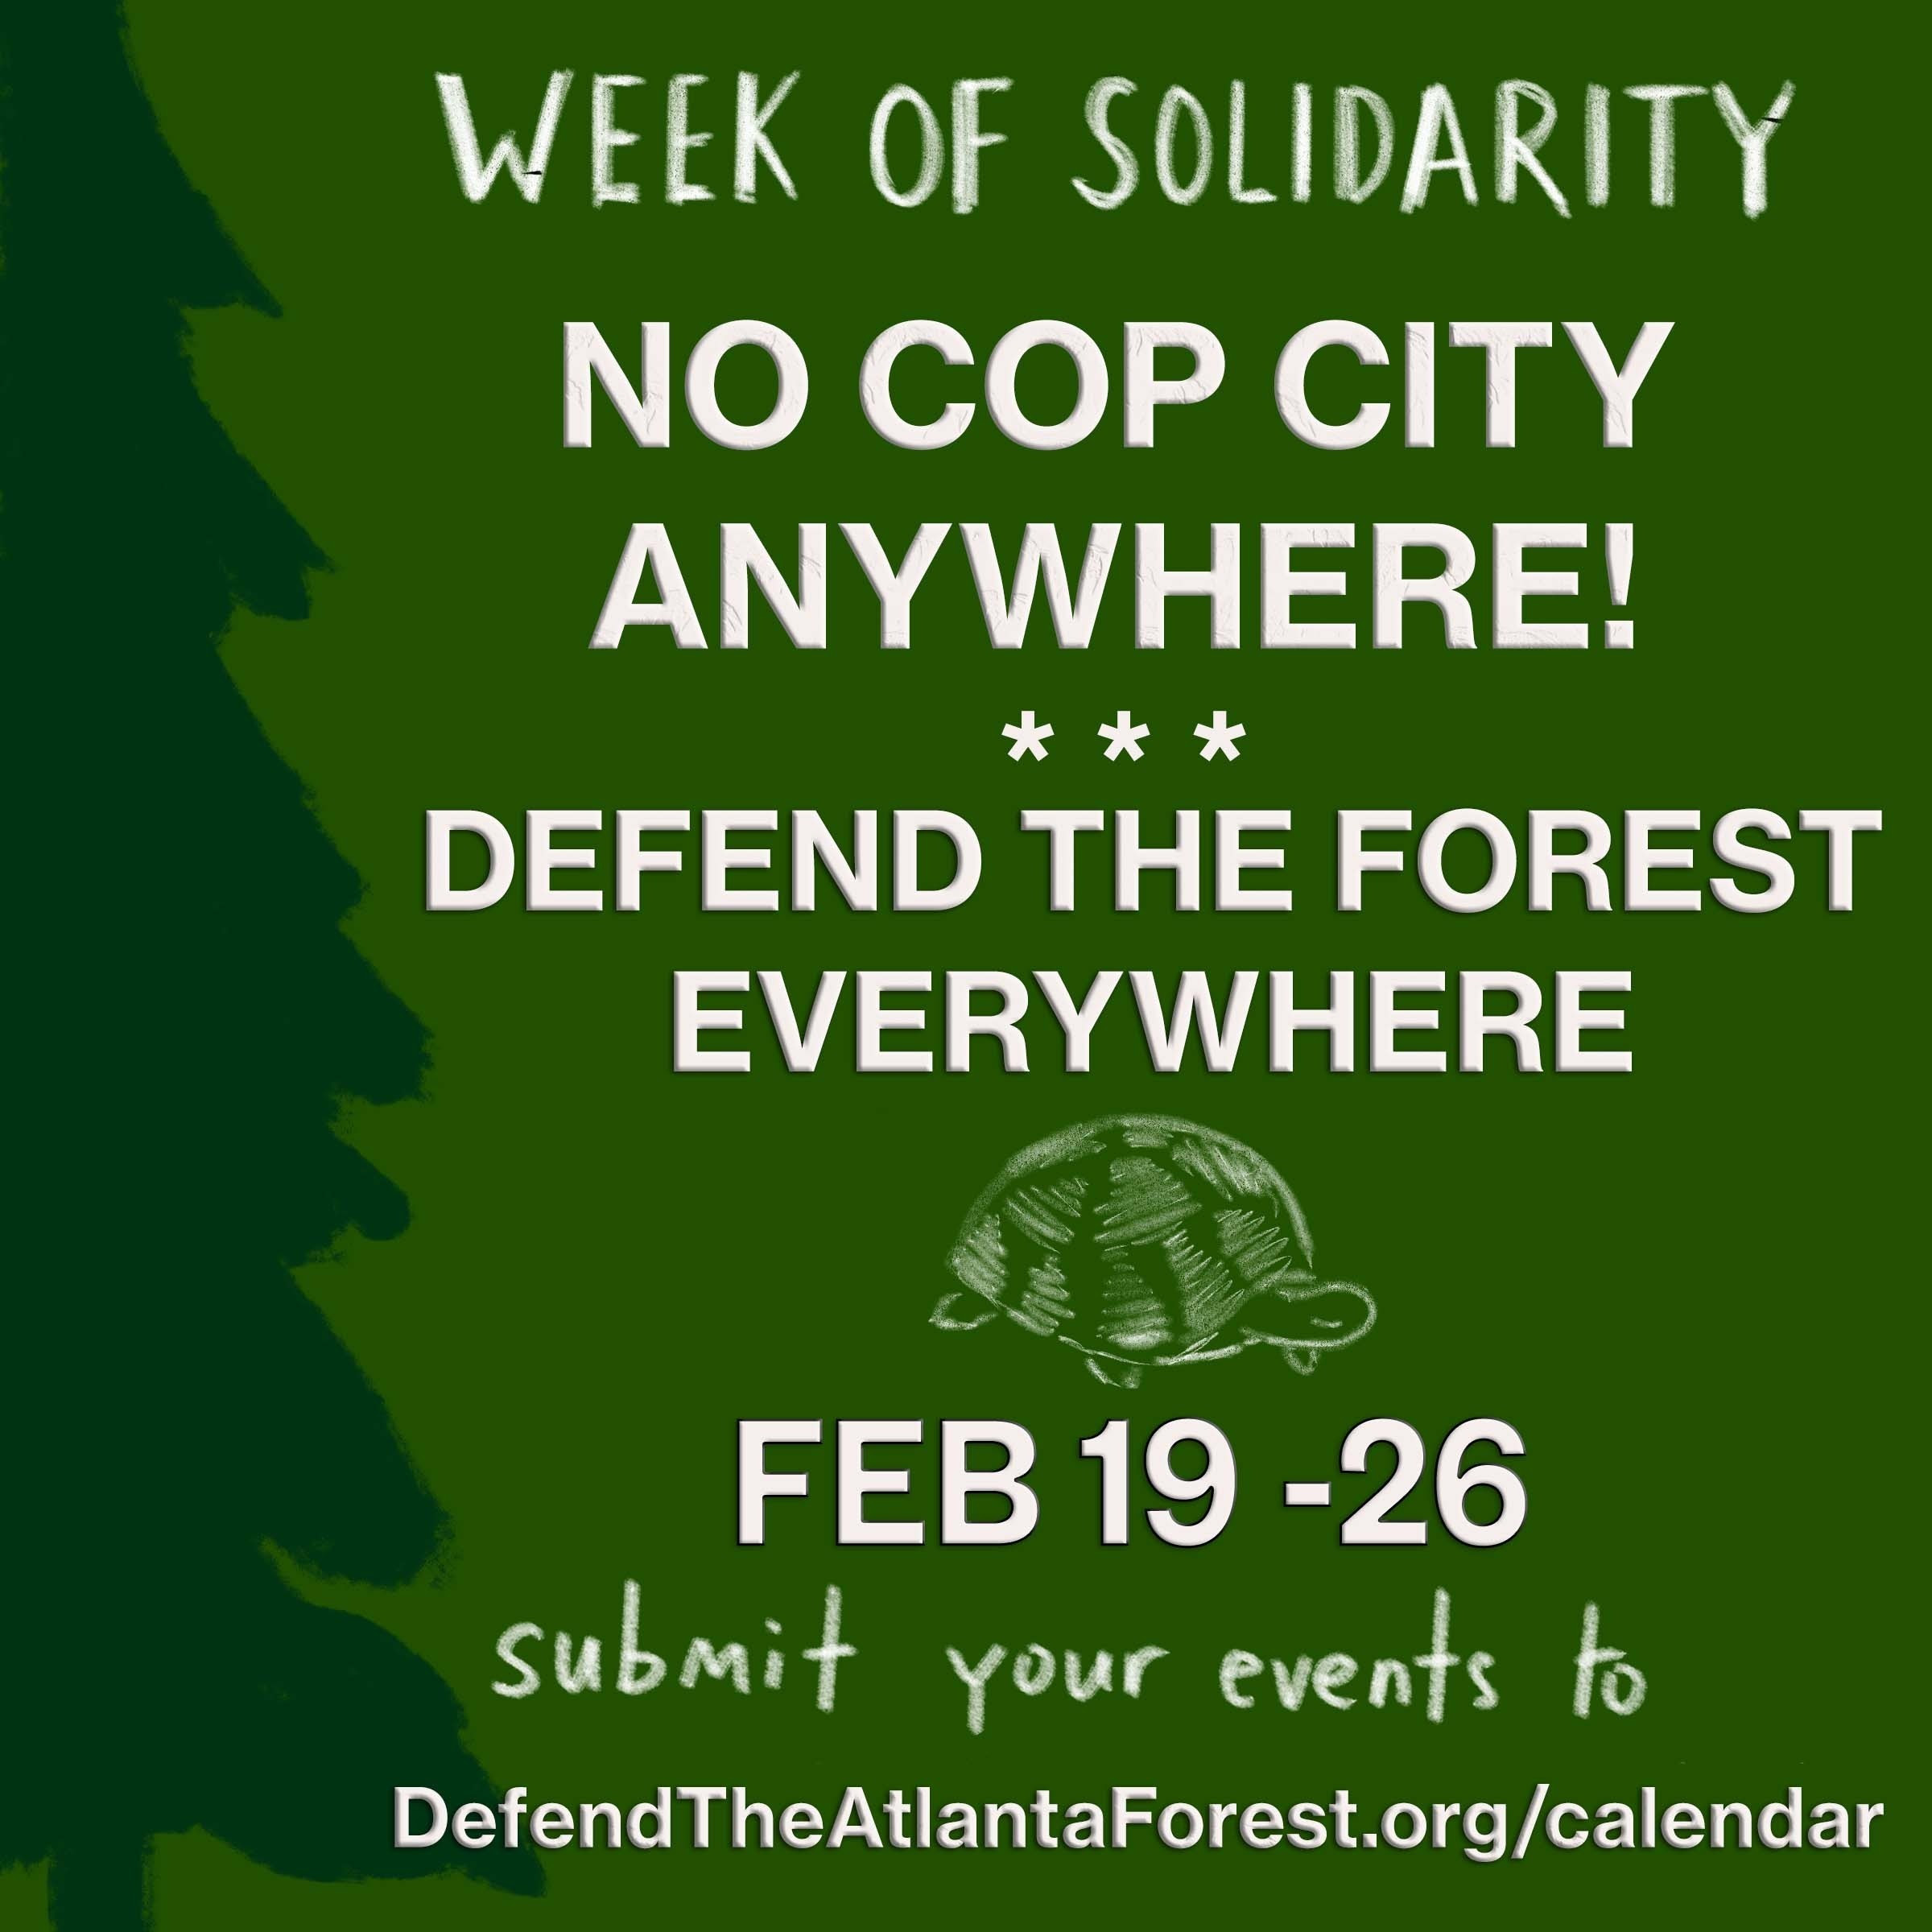 No Cop City, Anywhere. Defend the forest everywhere. Take action Feb 19-26